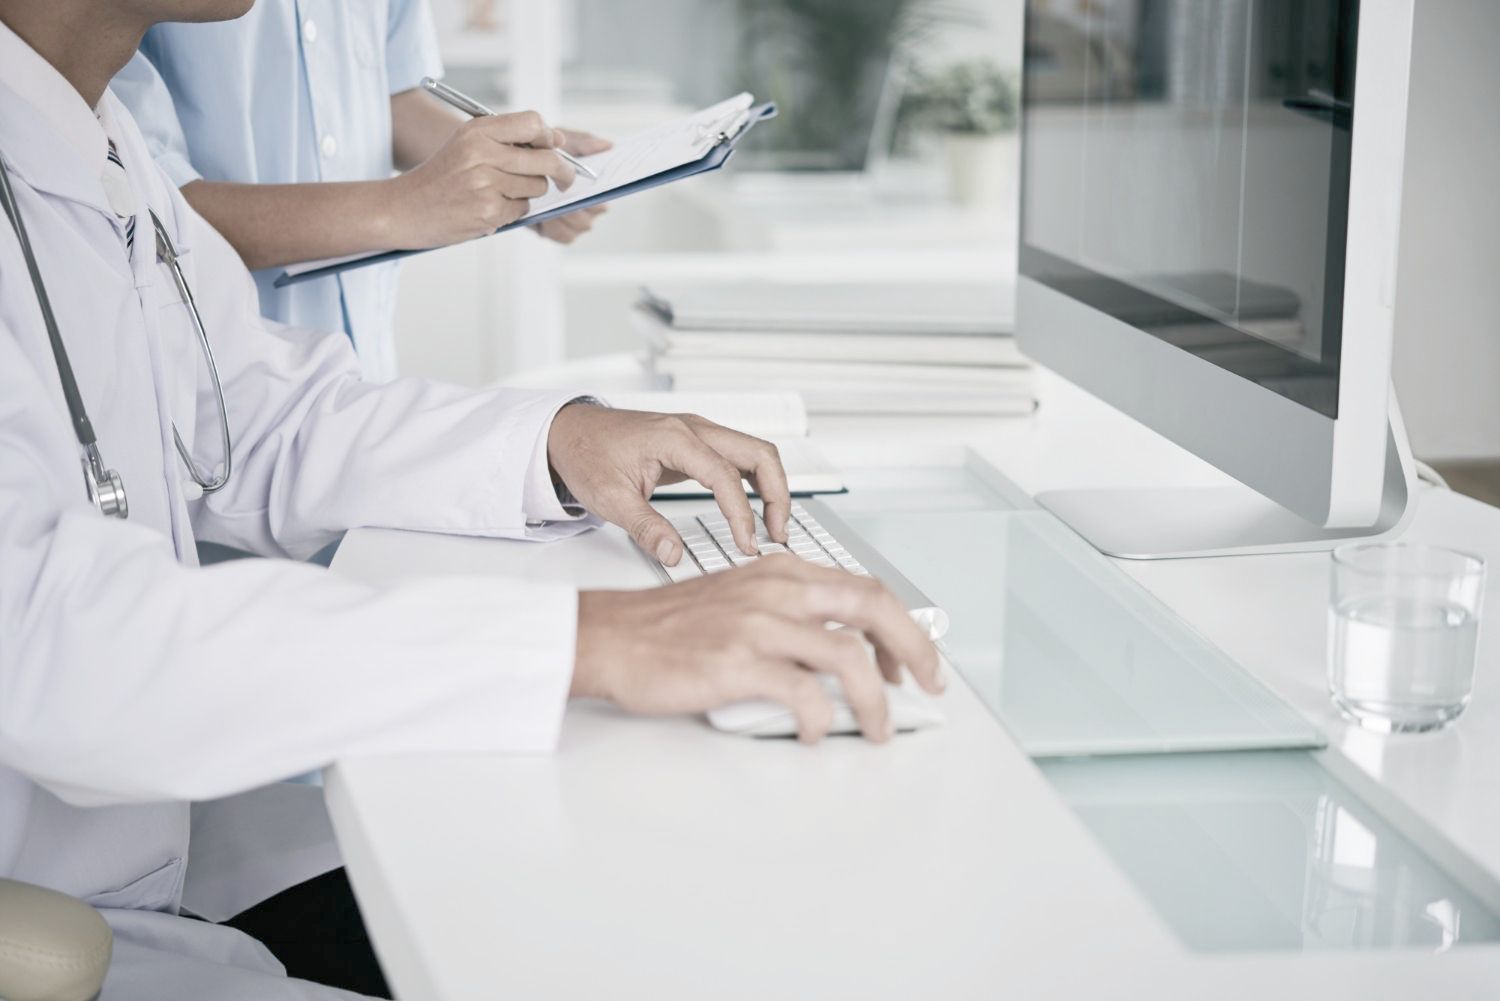 A doctor is typing on a computer keyboard while an assistant looks at a clipboard.